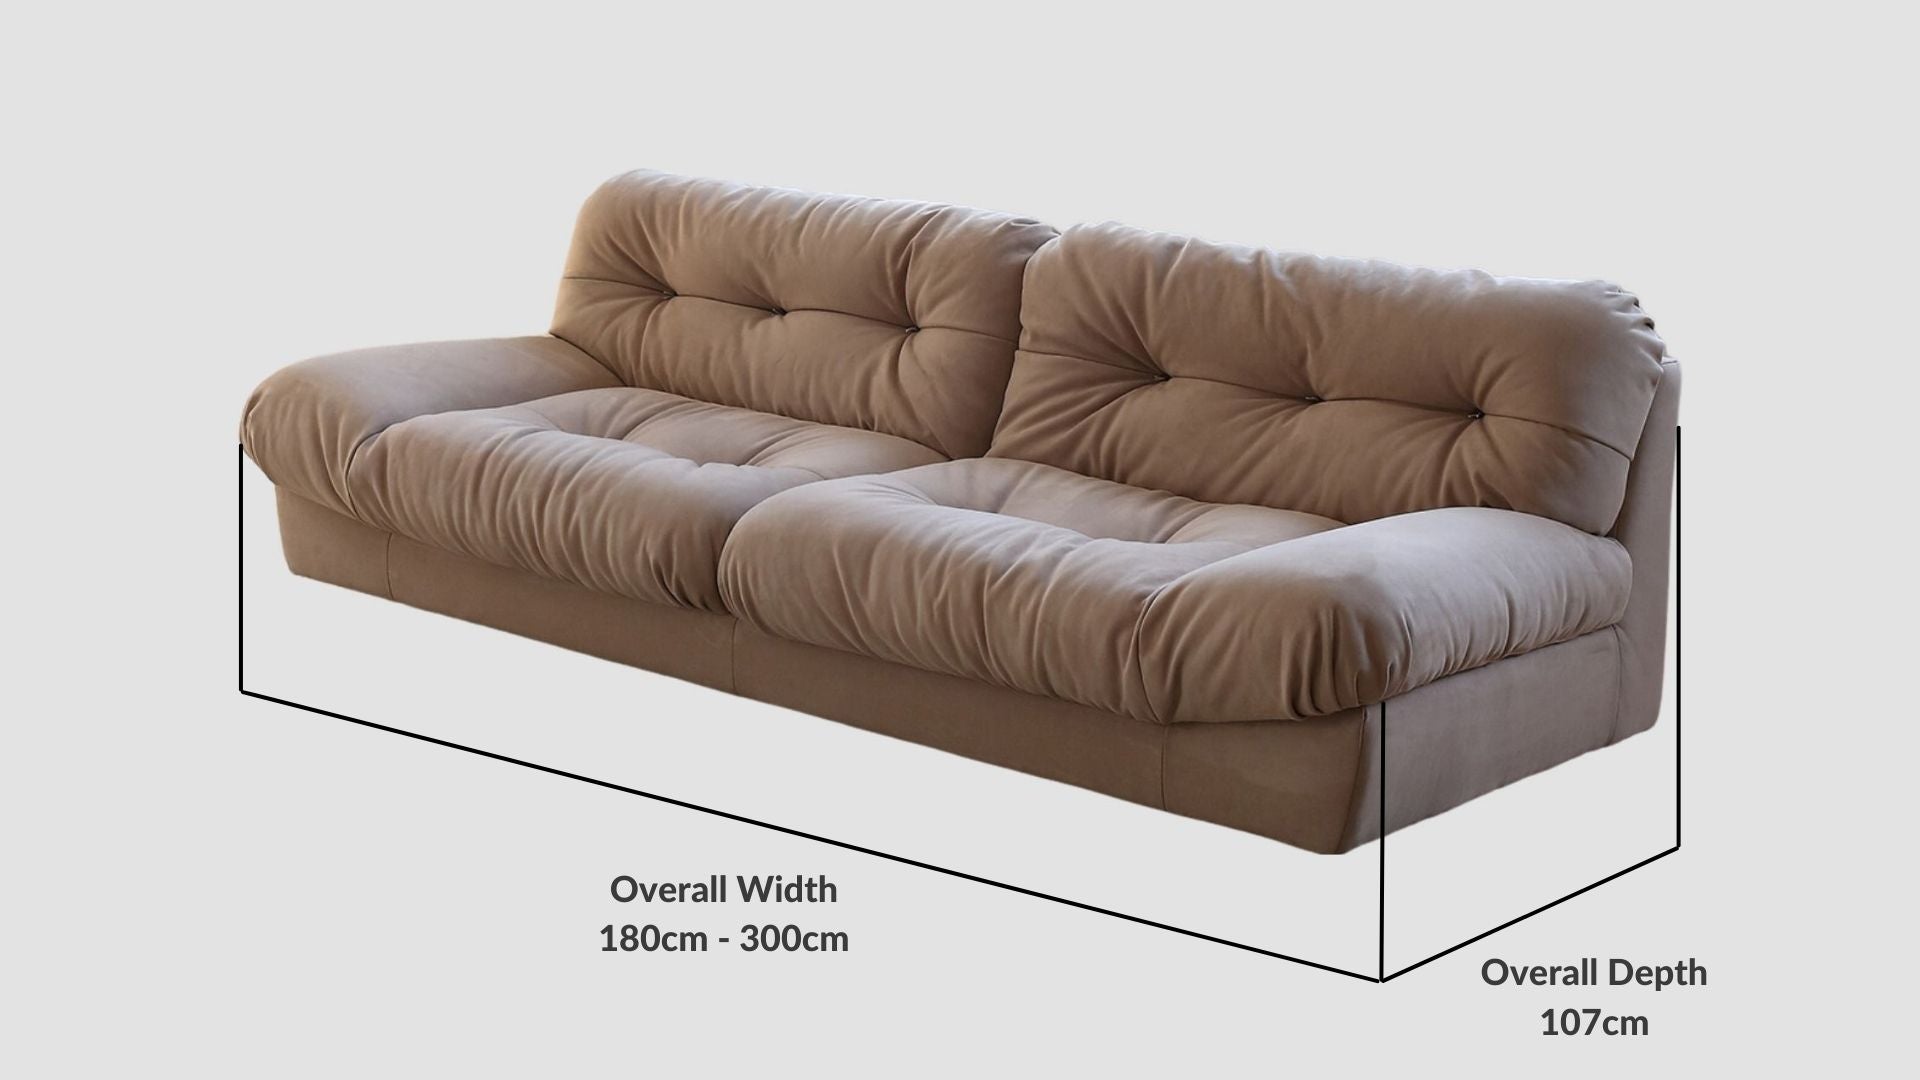 Details the key dimensions in terms of overall width, overall depth and seat width for Clora Fabric Sofa